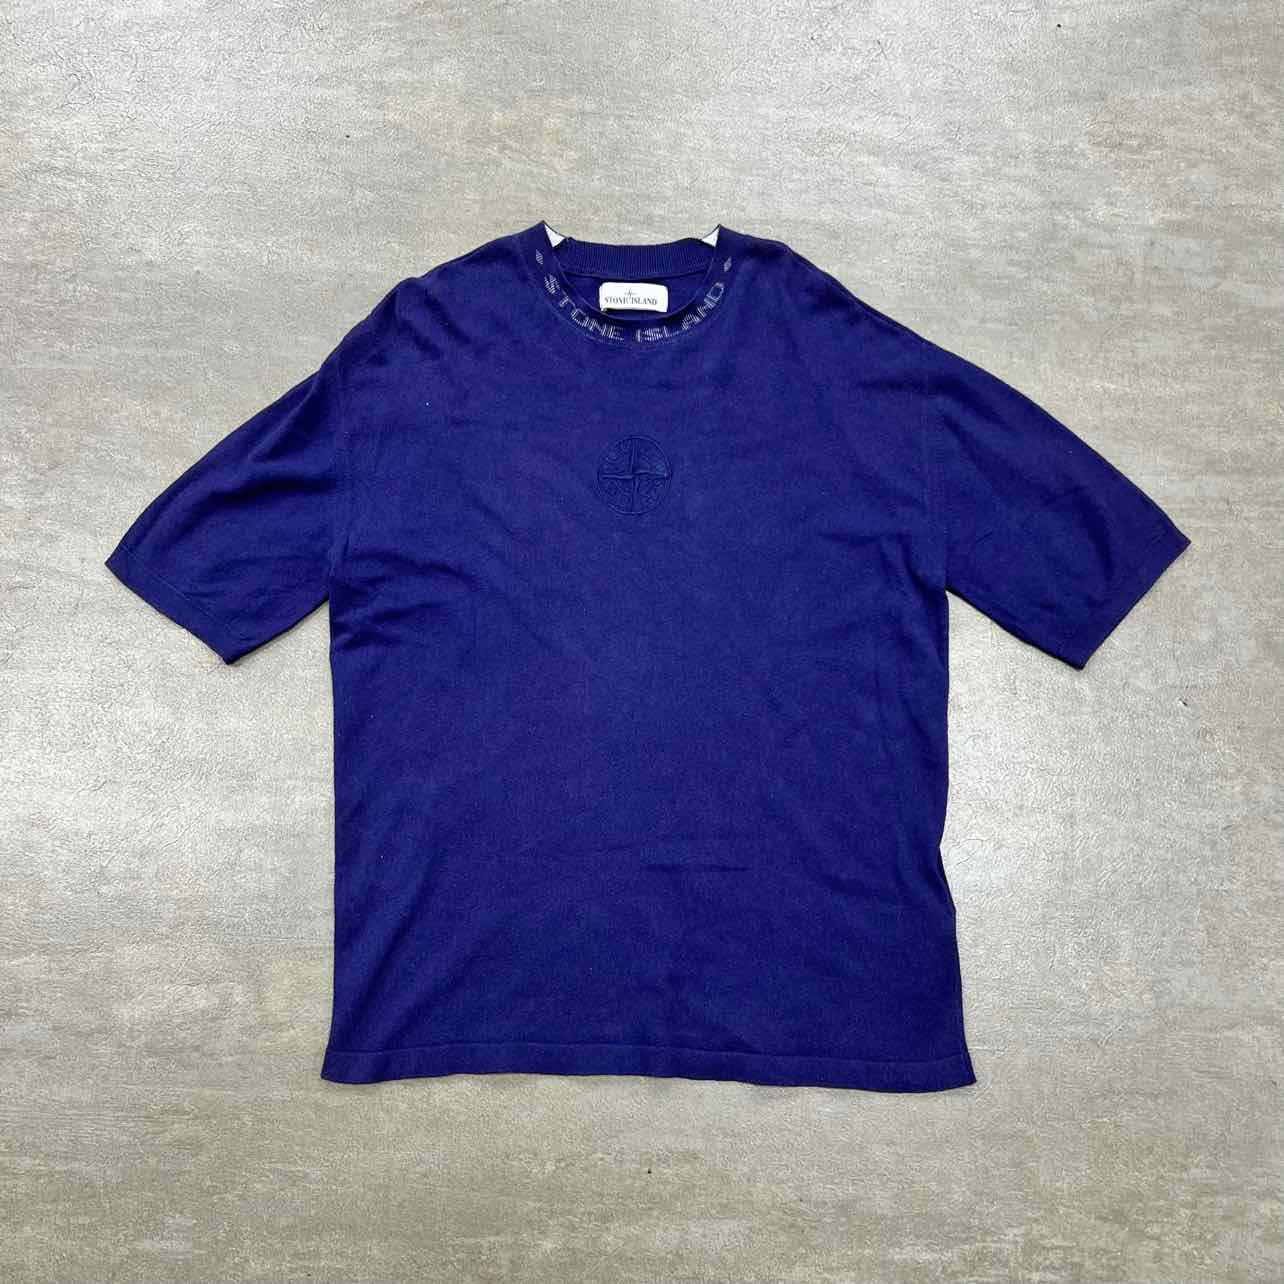 Stone Island T-Shirt "COMPASS" Navy Used Size M